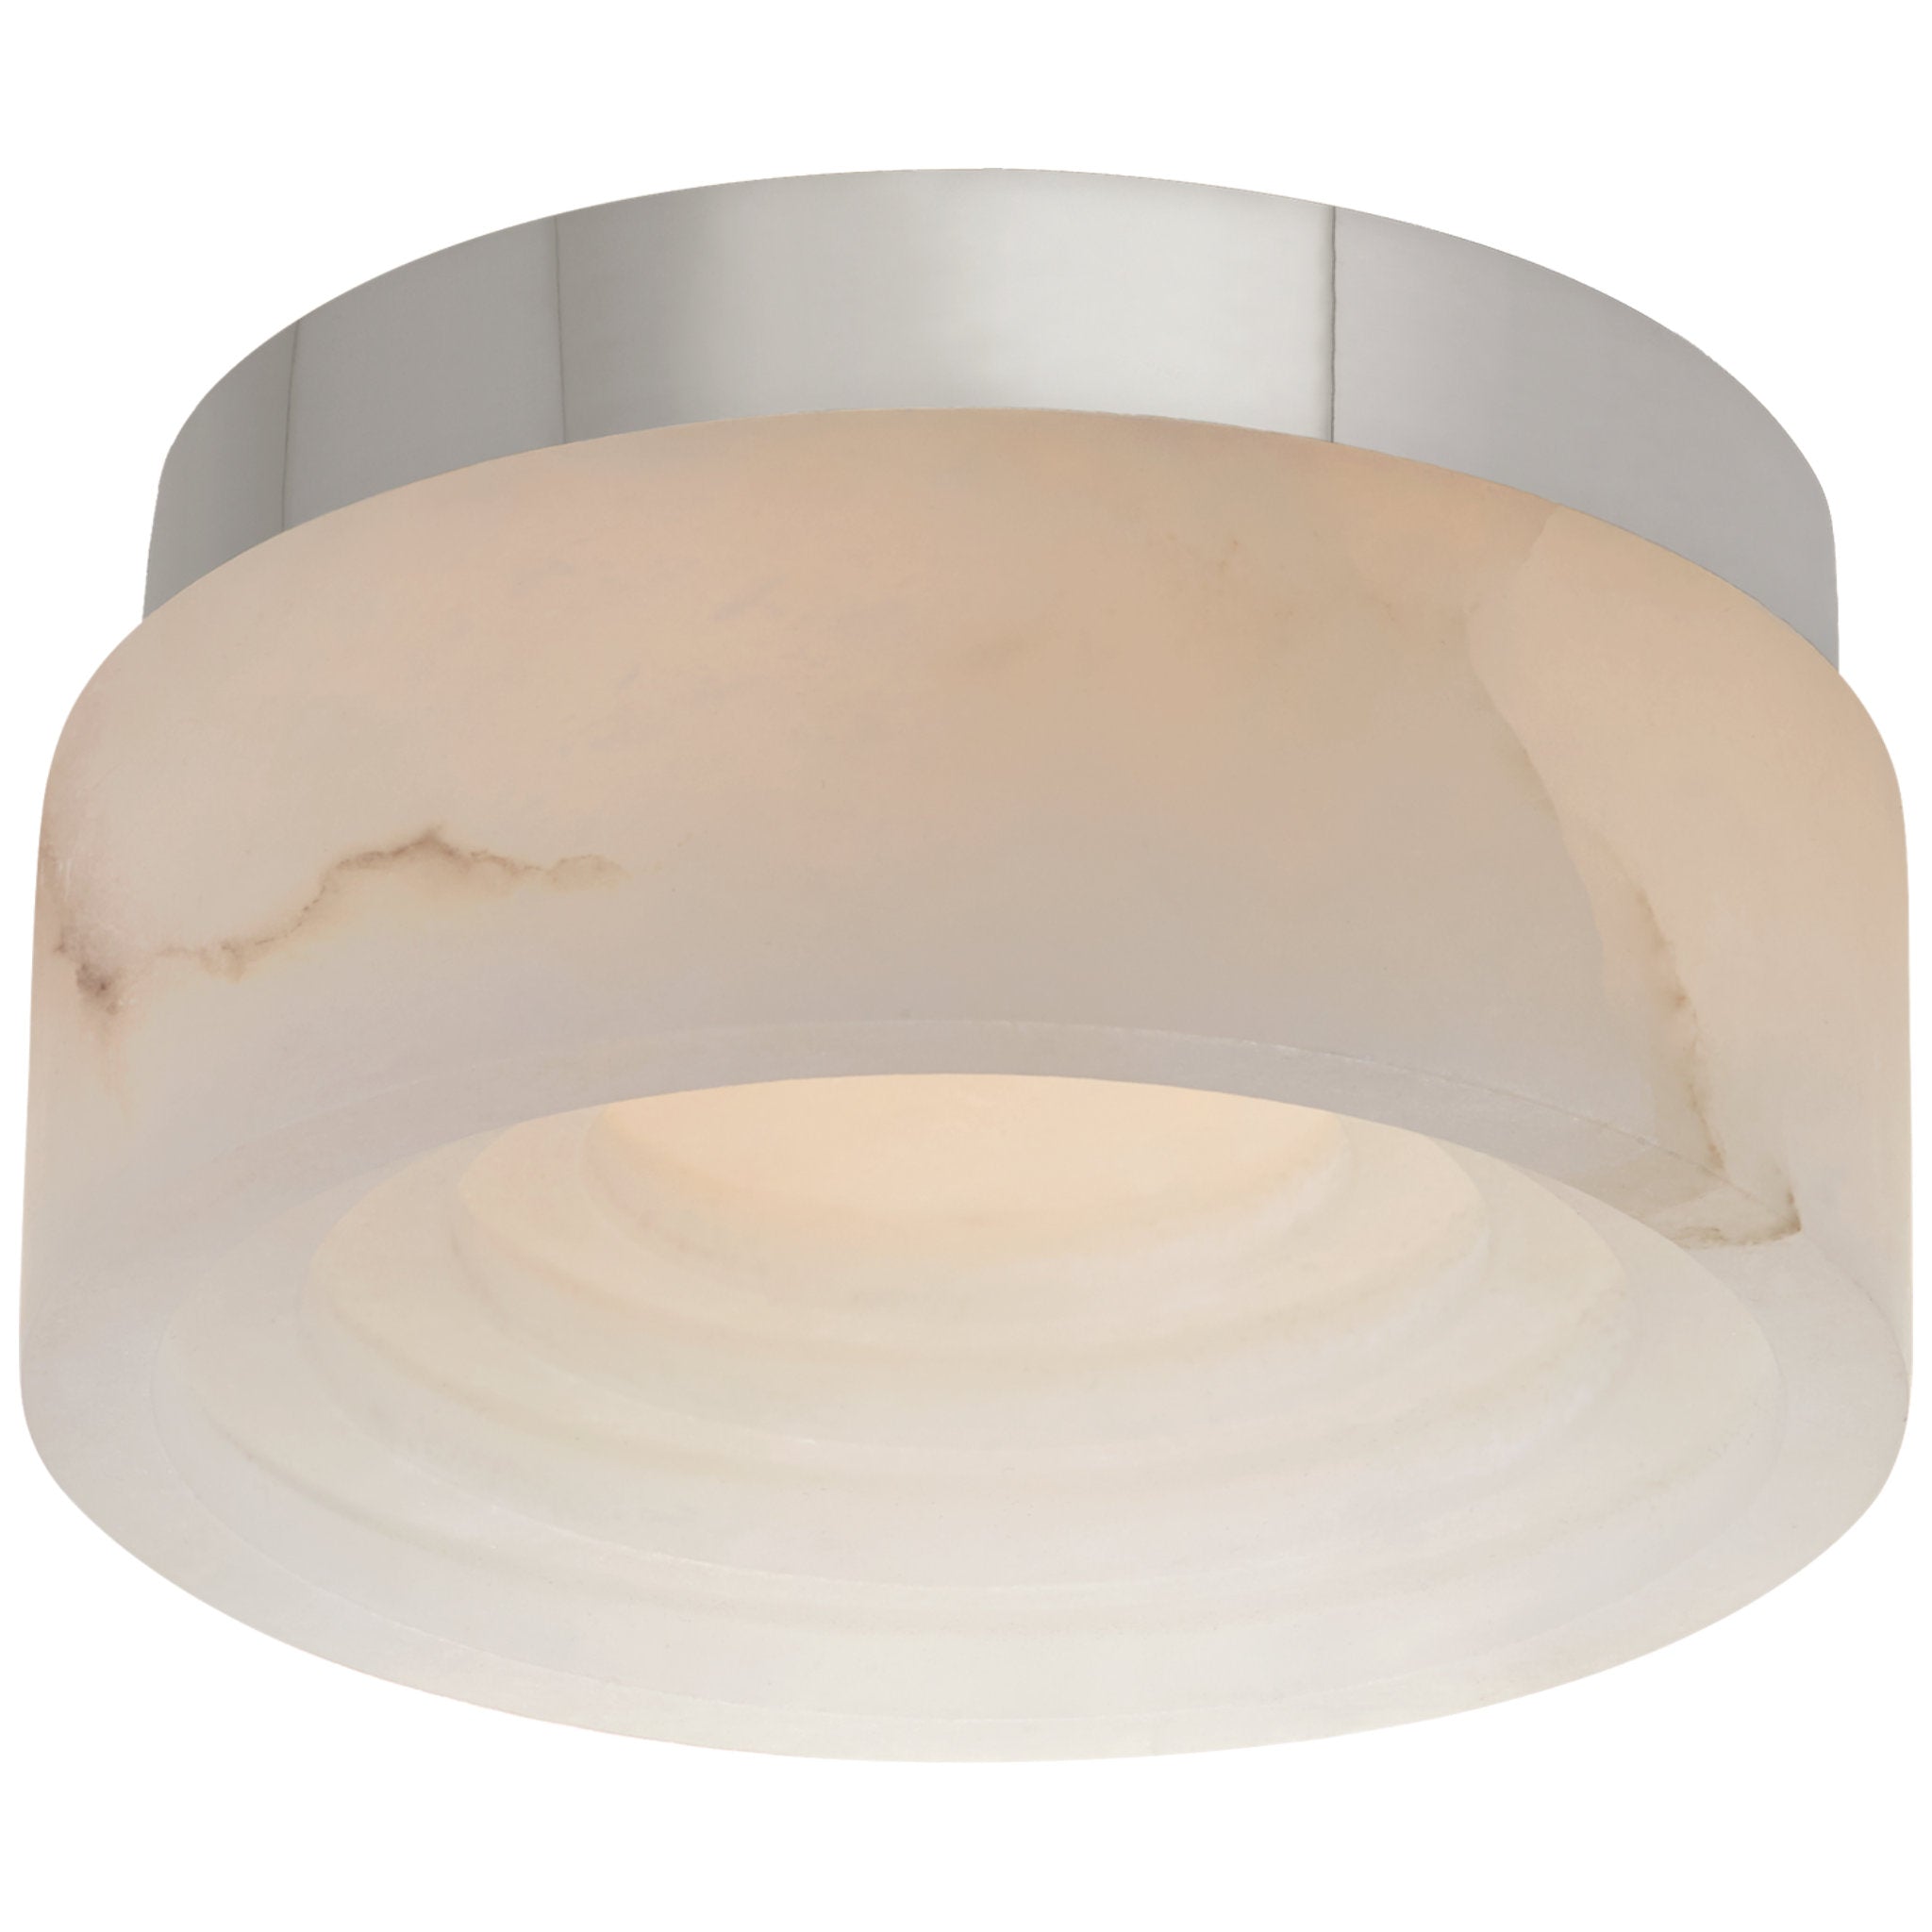 Kelly Wearstler Otto 5" Solitaire Flush Mount in Polished Nickel with Alabaster